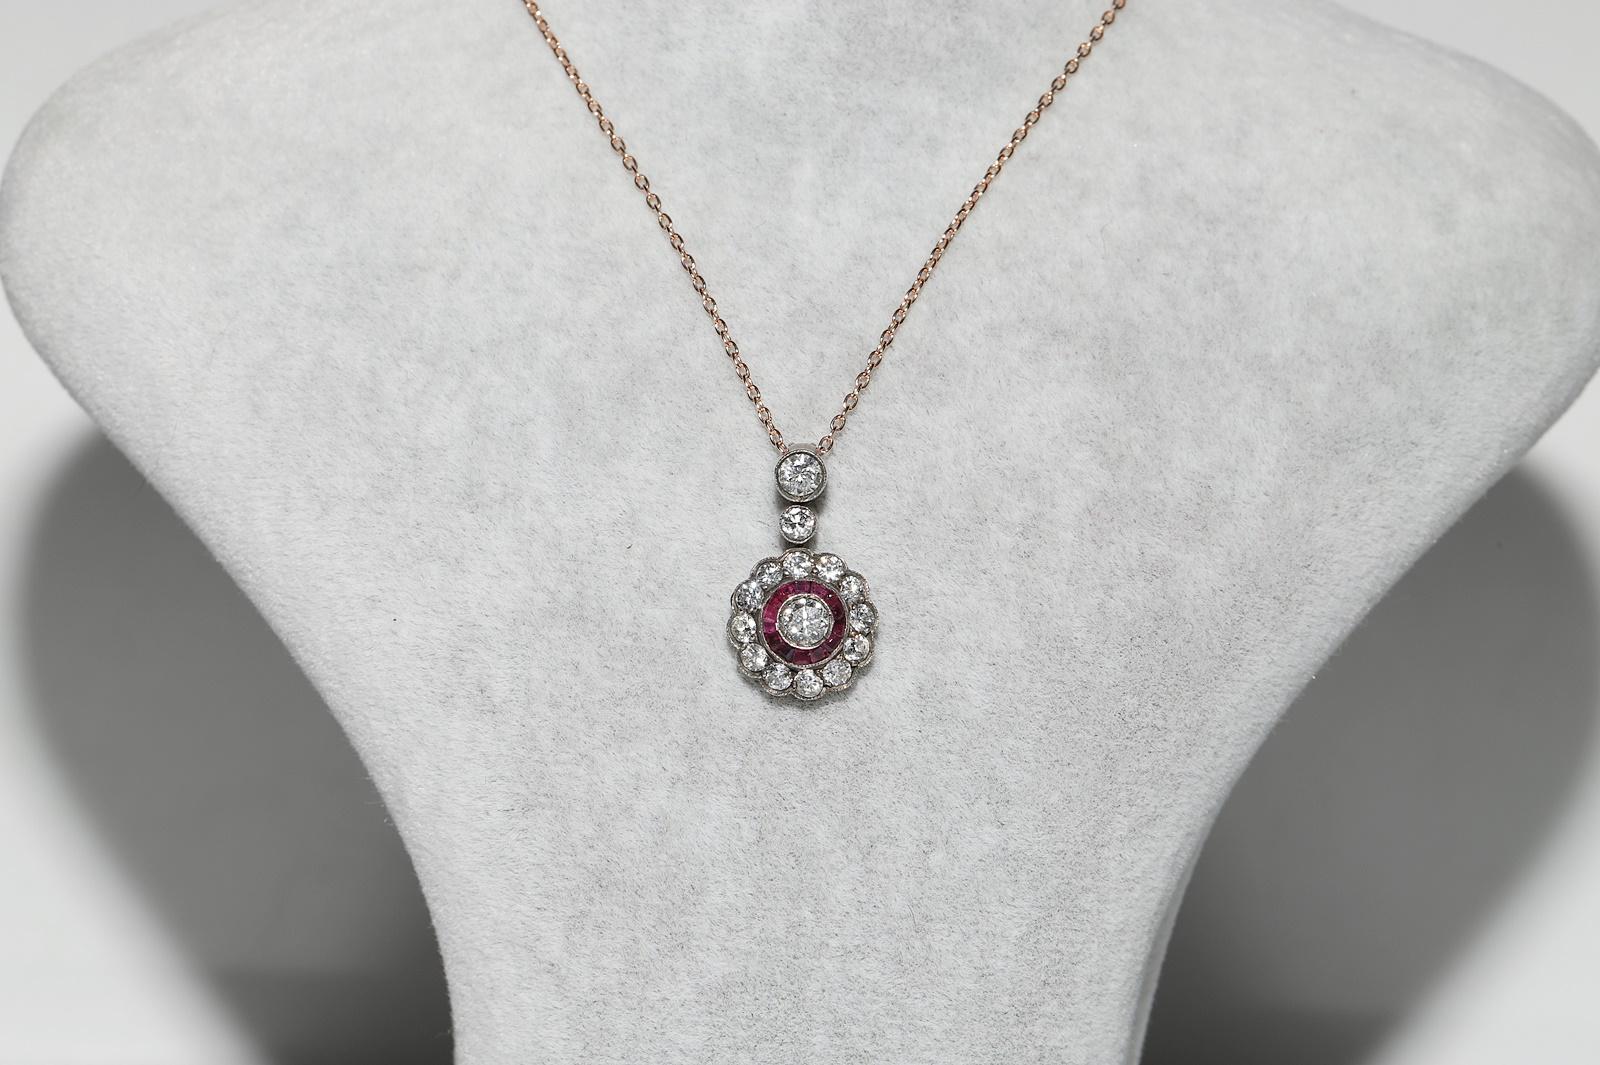 In very good condition.
Total weight is 3.4 grams.
Totally is diamond about 1.20 ct.
The diamond has vs-s1-s2 clarity and G-H color.
Totally is ruby about 0.40 ct.
Totally is chain lenght  45 cm.
Please contact for any questions.